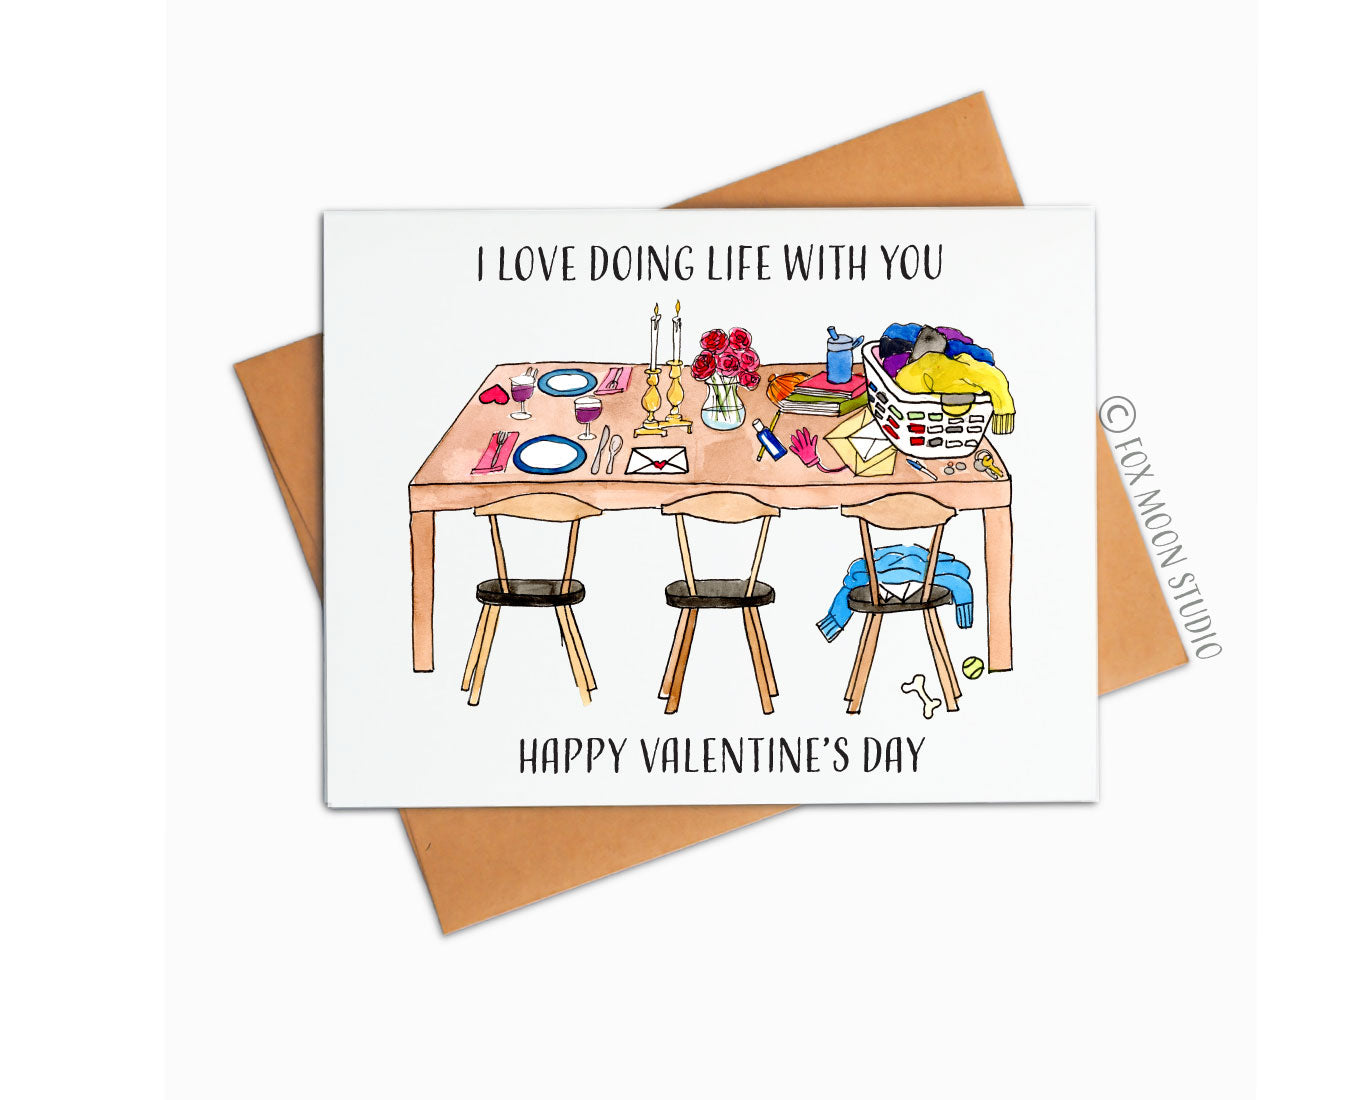 I Love Doing Life With You - Happy Valentine's Day Greeting Card